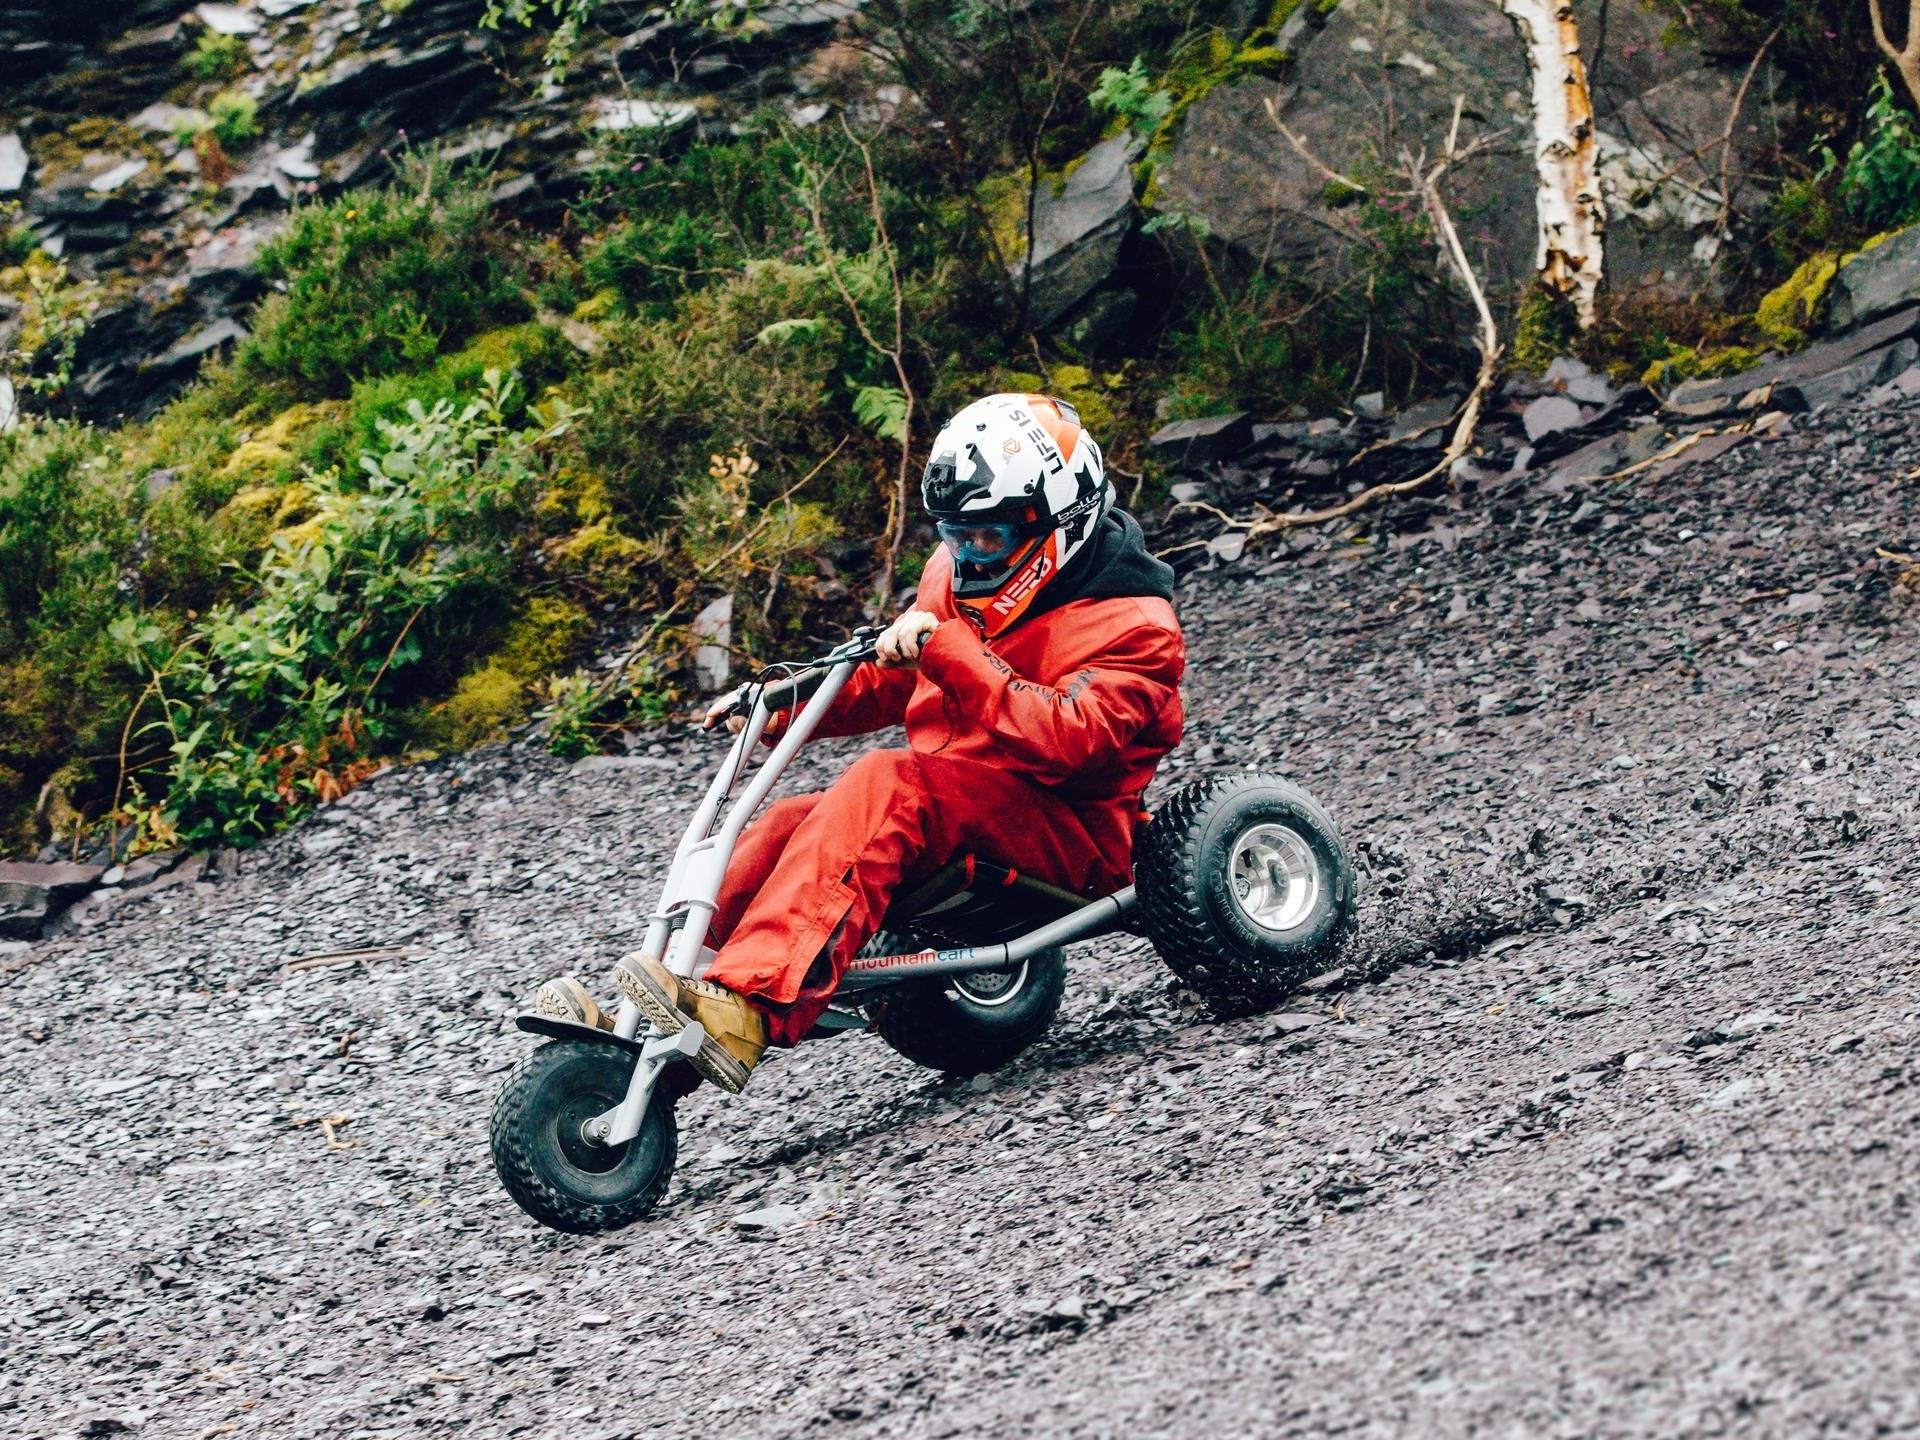 A rider takes on the Quarry Karts track